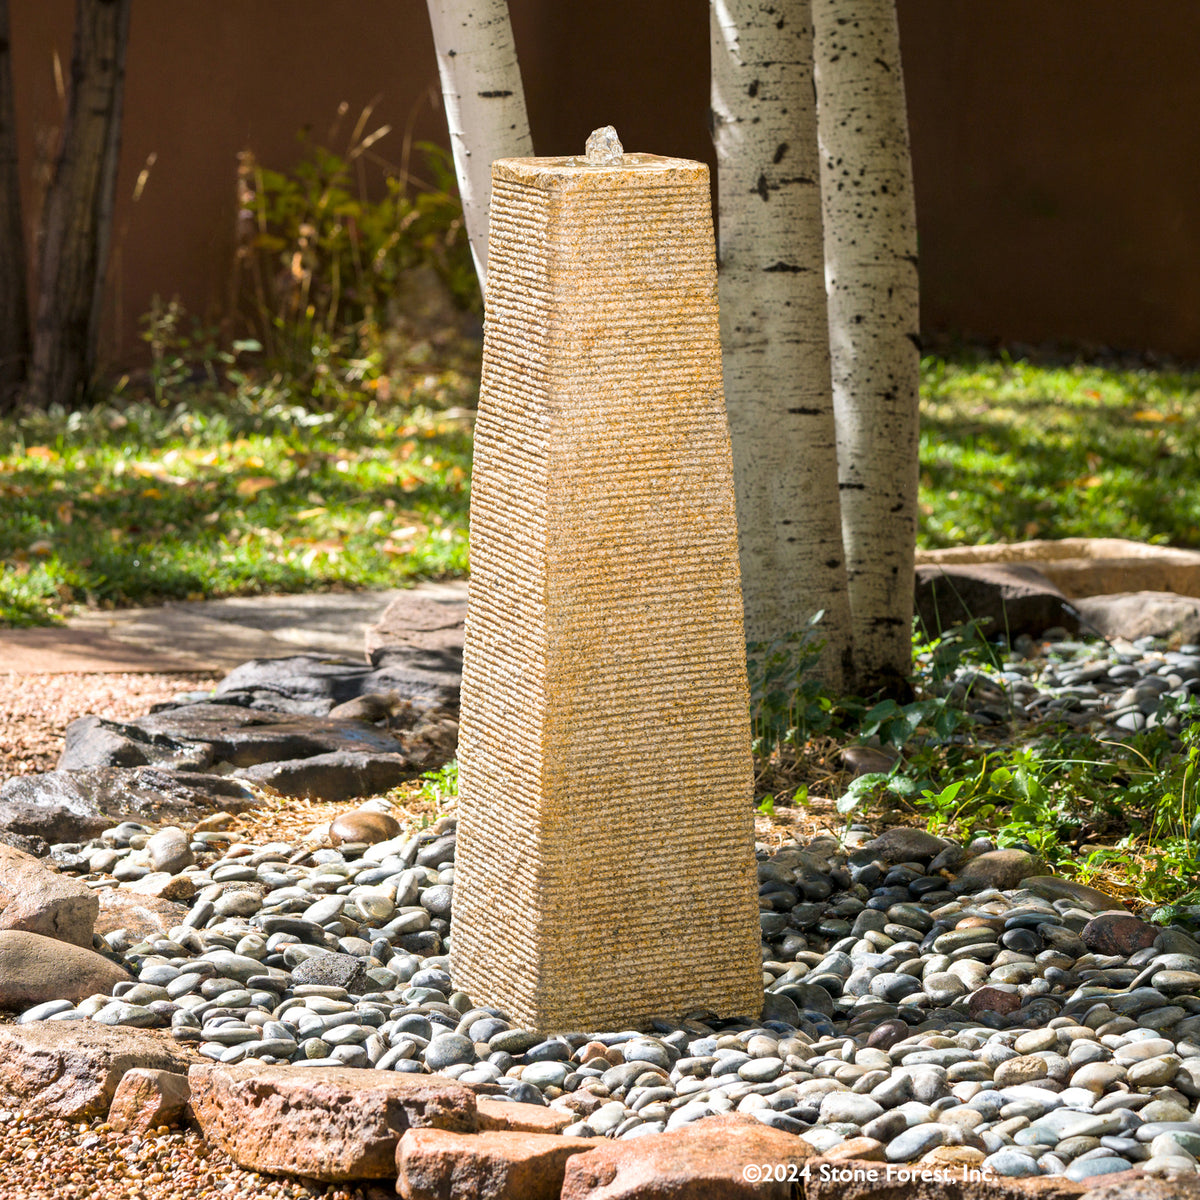 The Obelisk Fountain is a stone pillar, typically having a square cross-section and a pyramidal top. Set it up as a monument or landmark. Carved from Beige Granite. image 1 of 2